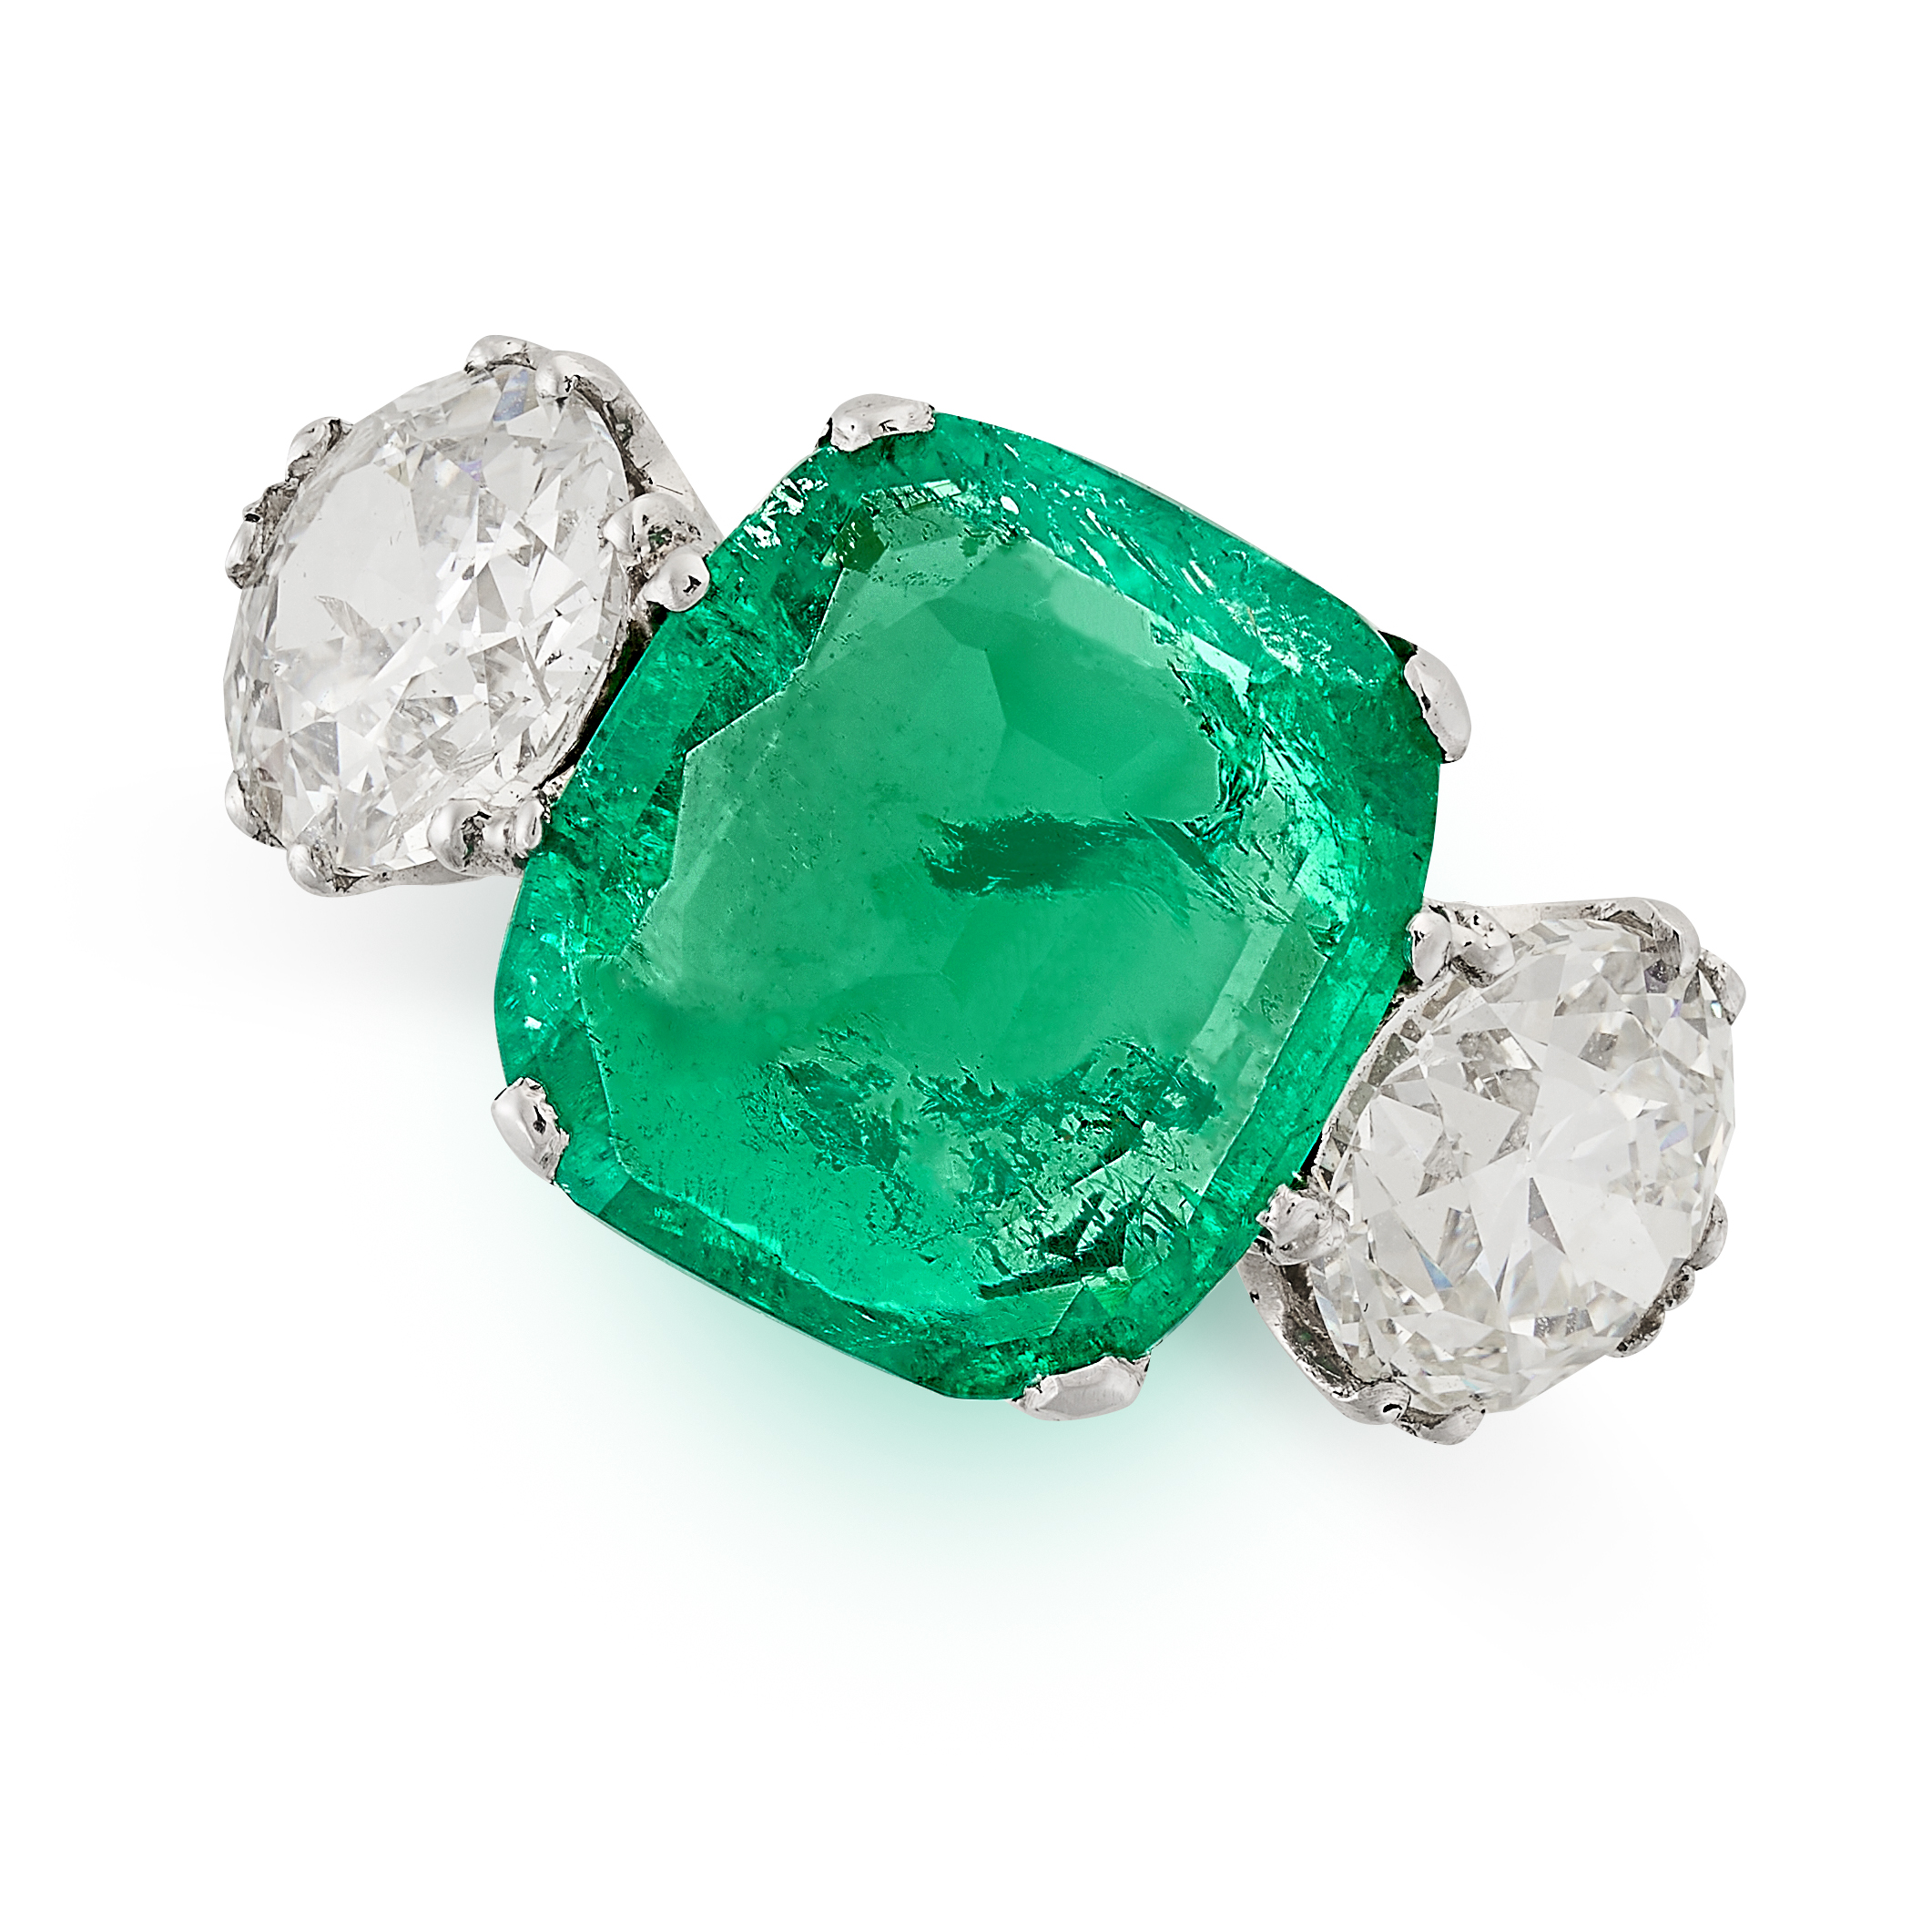 A FINE COLOMBIAN EMERALD AND DIAMOND DRESS RING in platinum, set with a cushion cut emerald of 4.